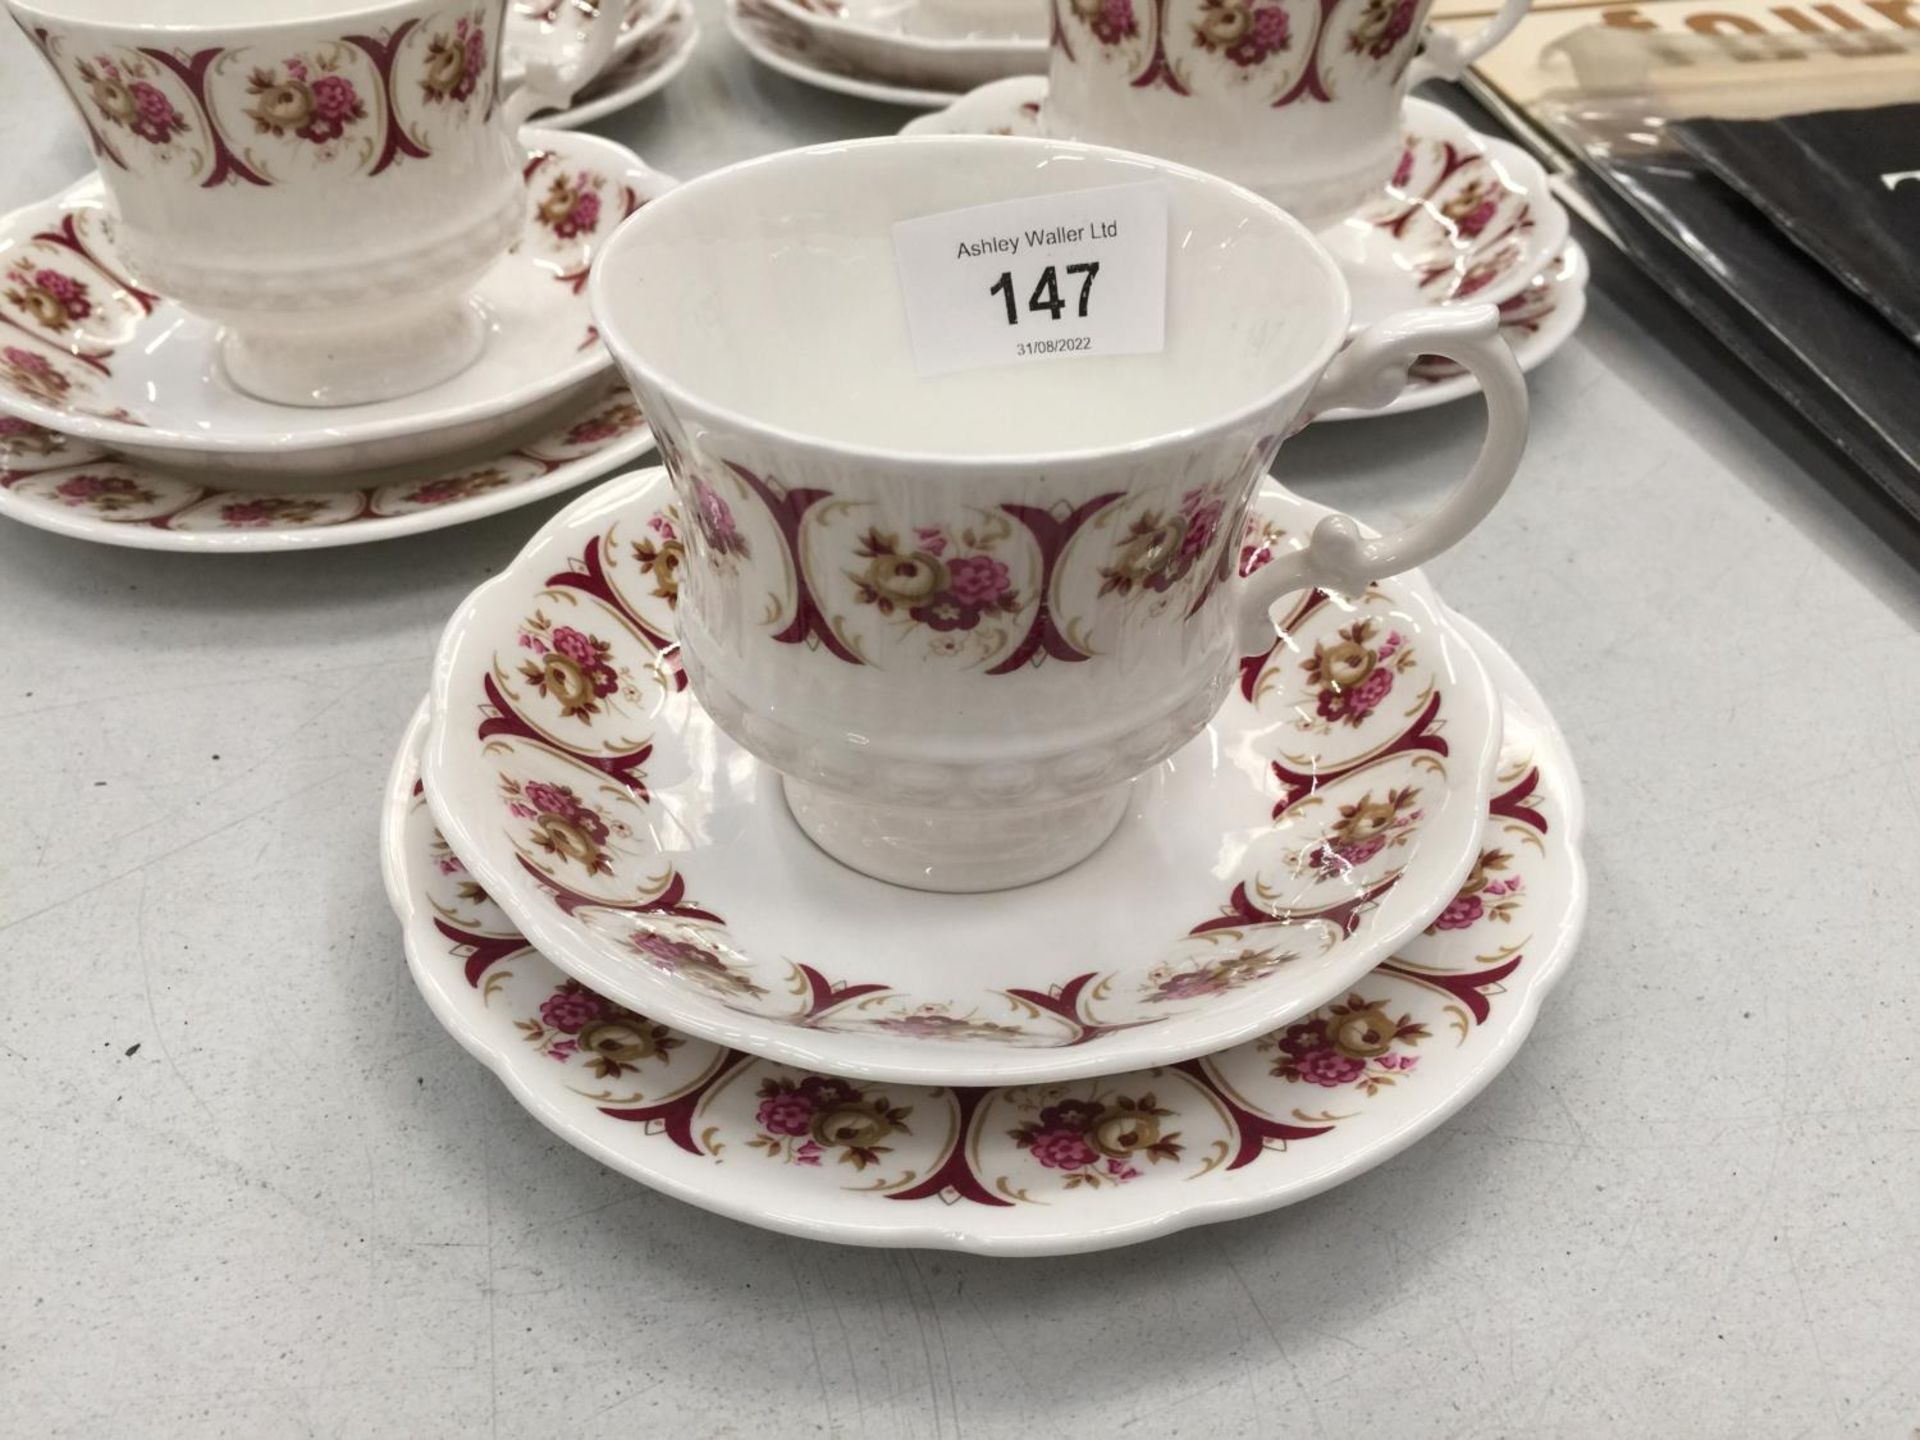 A CHINA PART TEASET 'DIANE' TO INCLUDE CUPS, SAUCERS, PLATES, CREAM JUG AND SUGAR BOWL - Image 2 of 5